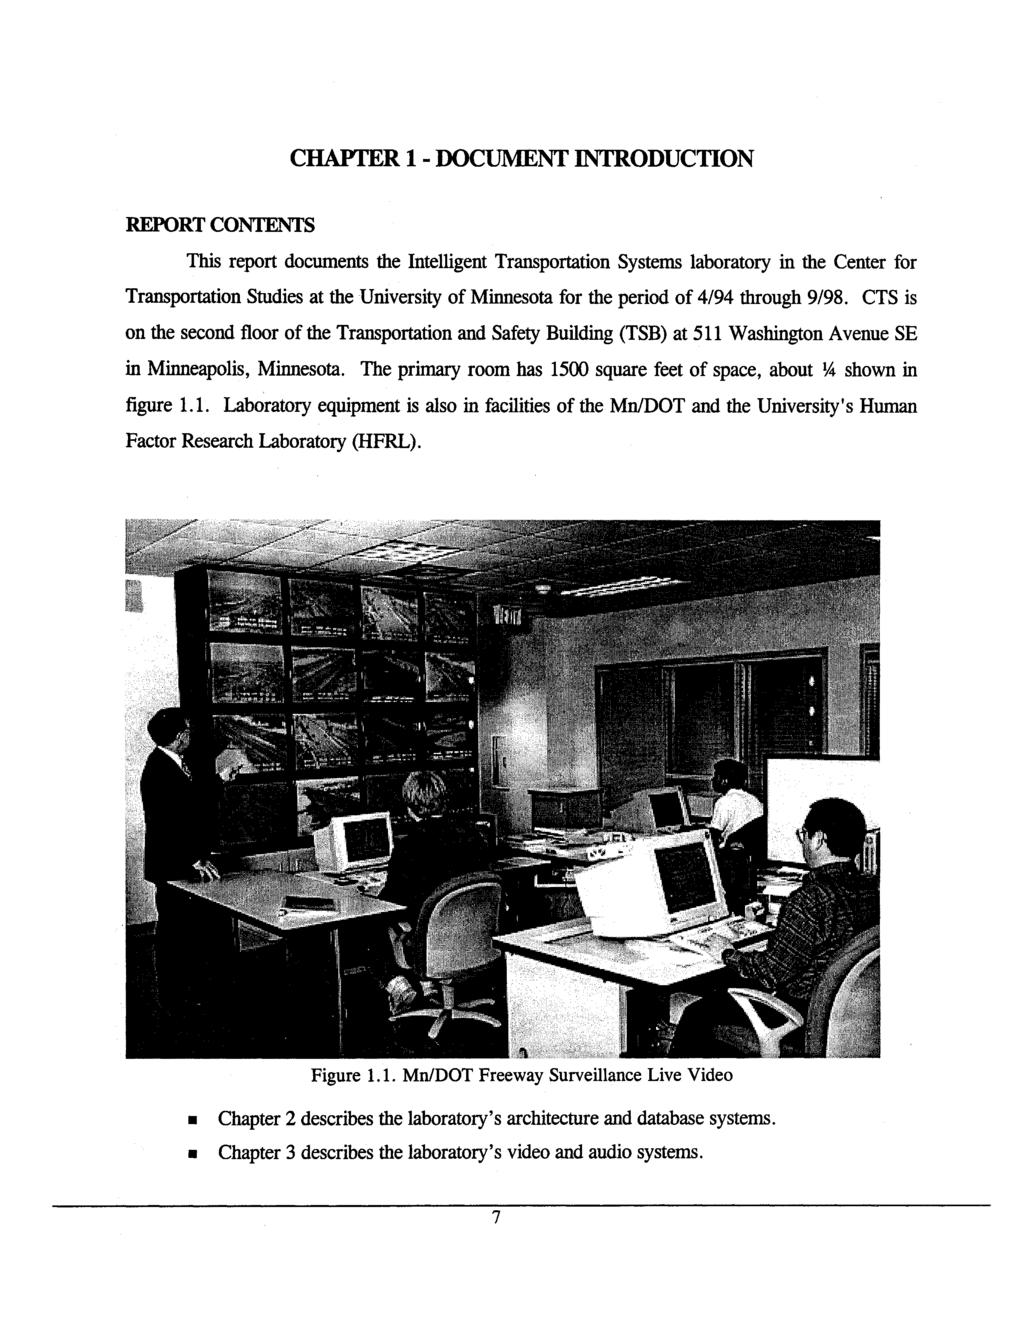 CHAPTER 1 - DOCUMENT INTRODUCTION REPORT CONTENTS This report documents the Intelligent Transportation Systems laboratory in the Center for Transportation Studies at the University of Minnesota for